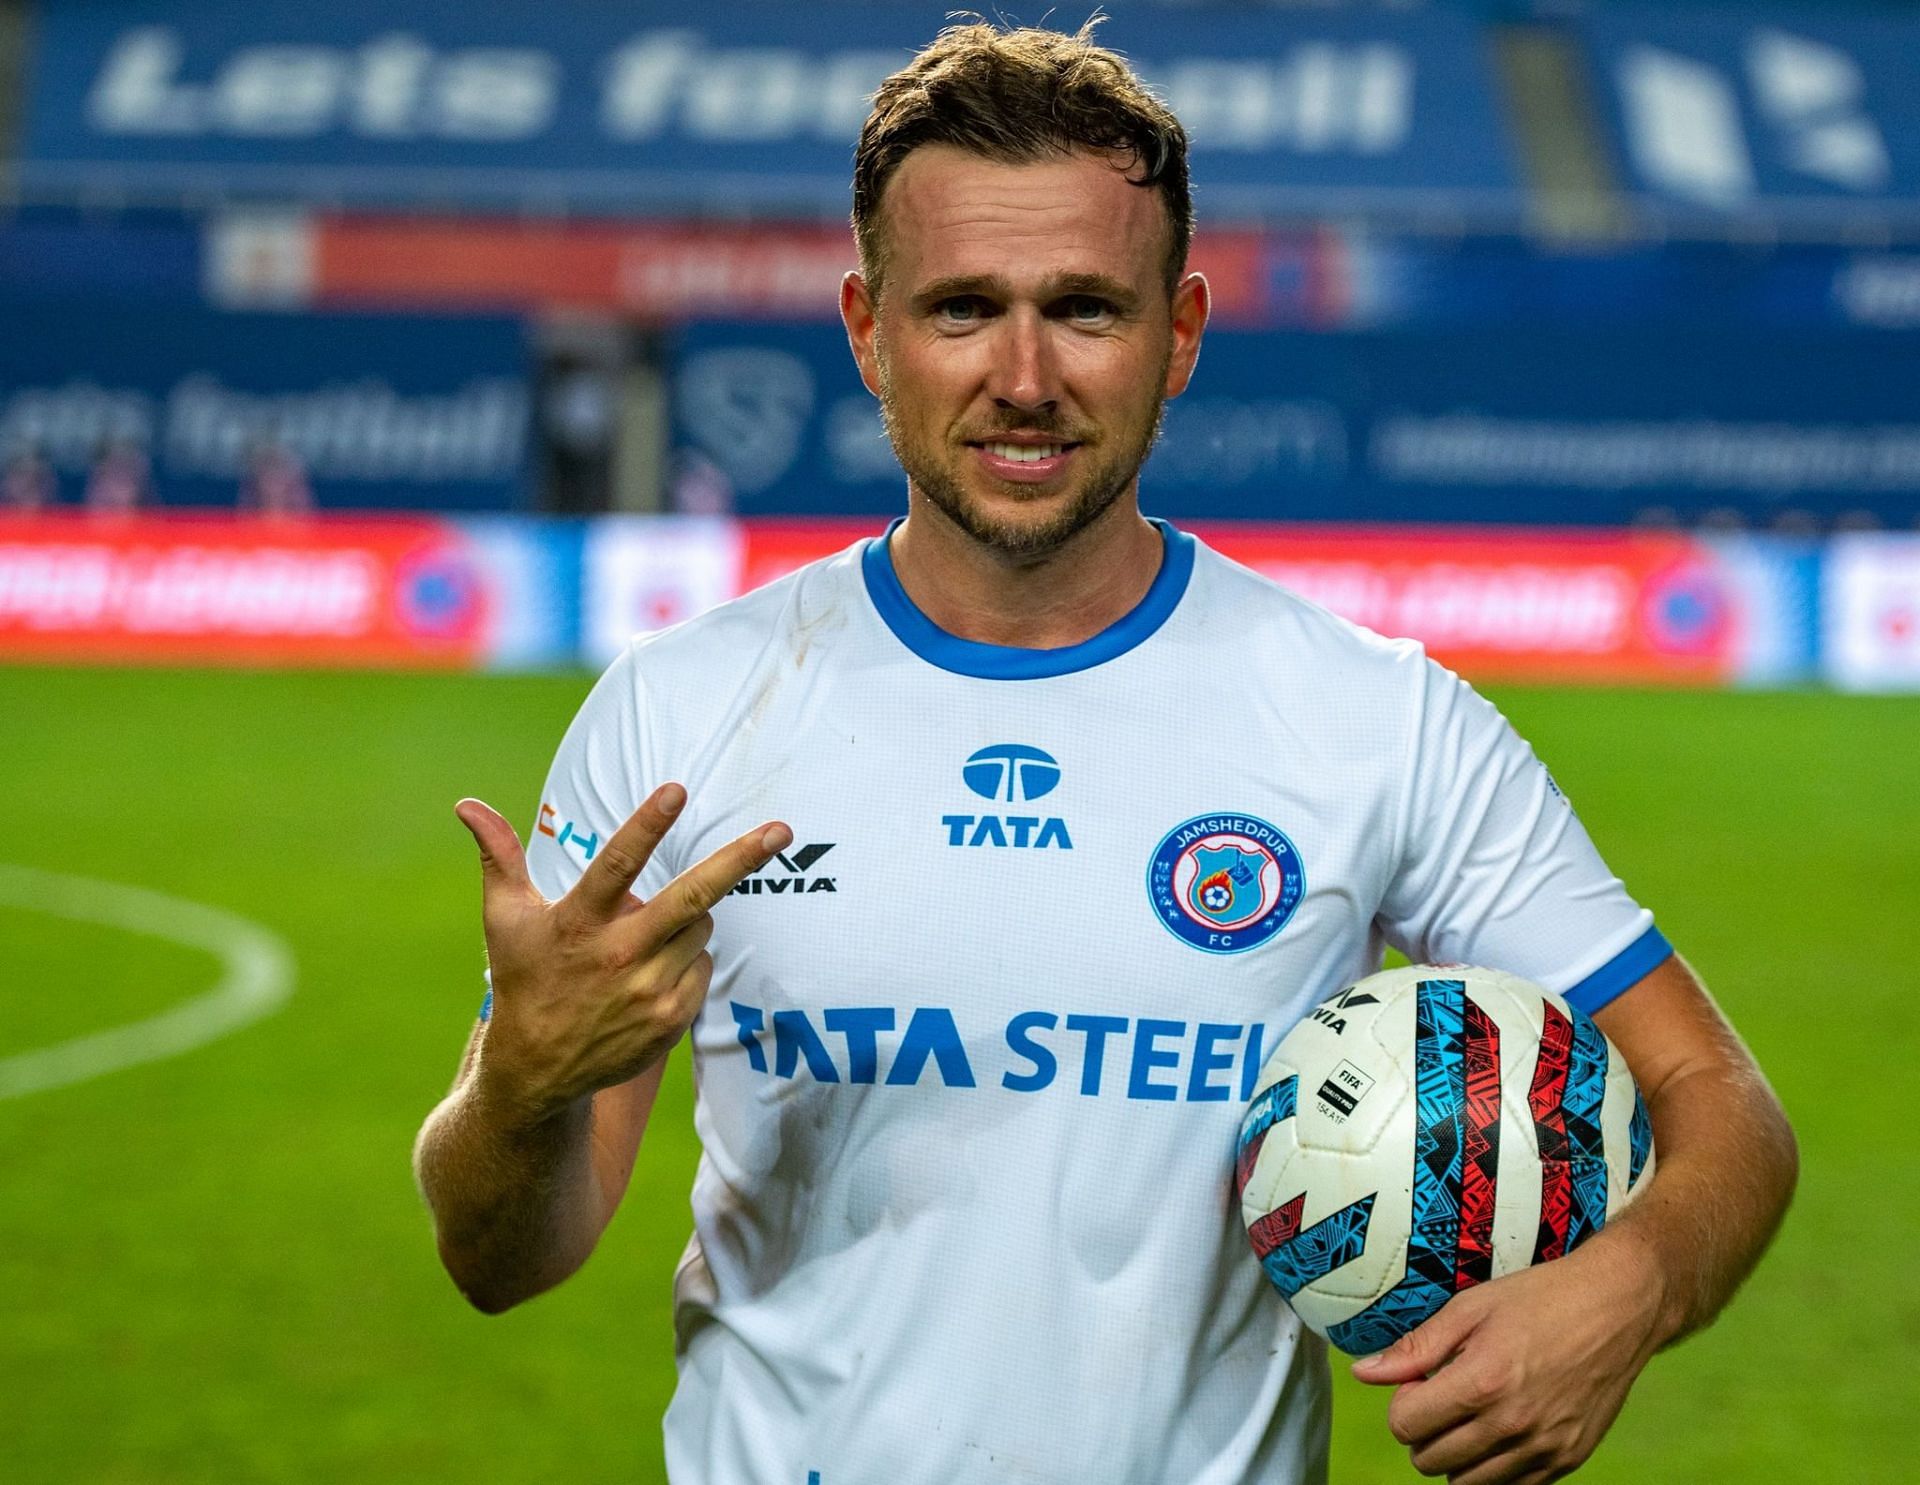 Greg Stewart was the man of the match today (image courtesy: ISL social media)